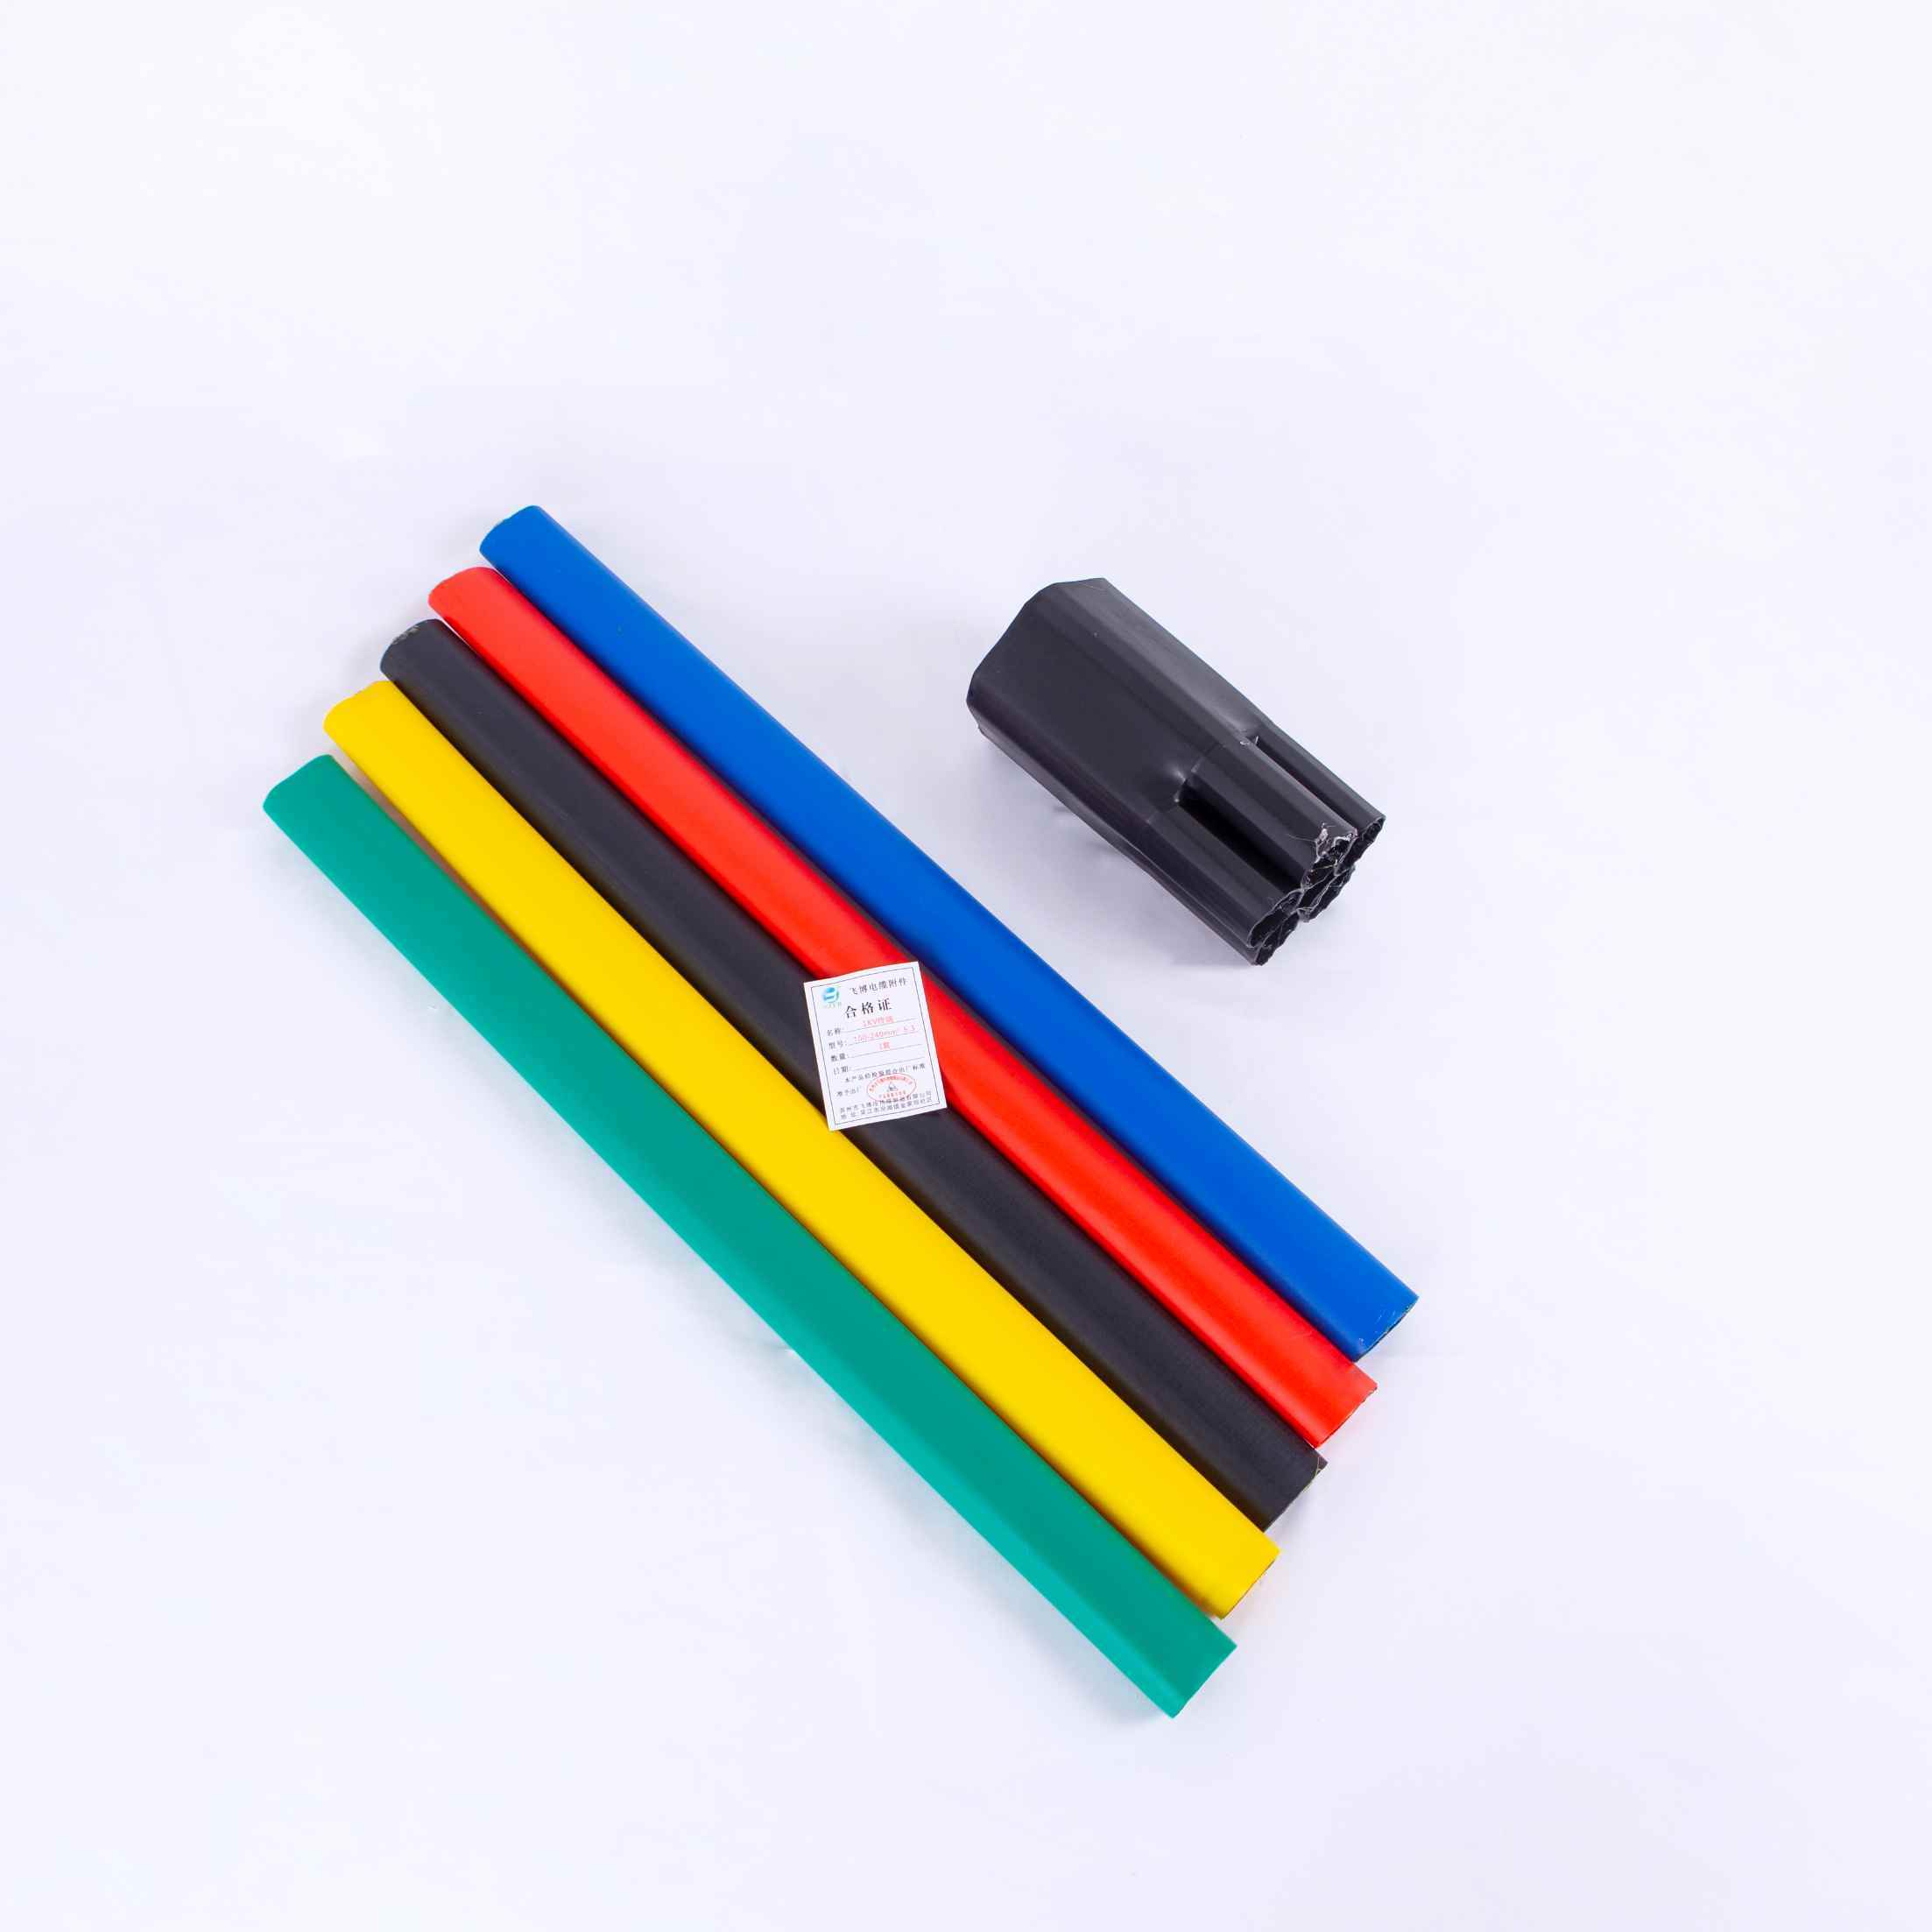 Insulation Cable Ends Joints Crimping Shrinkable Terminals Heat Shrink Kit